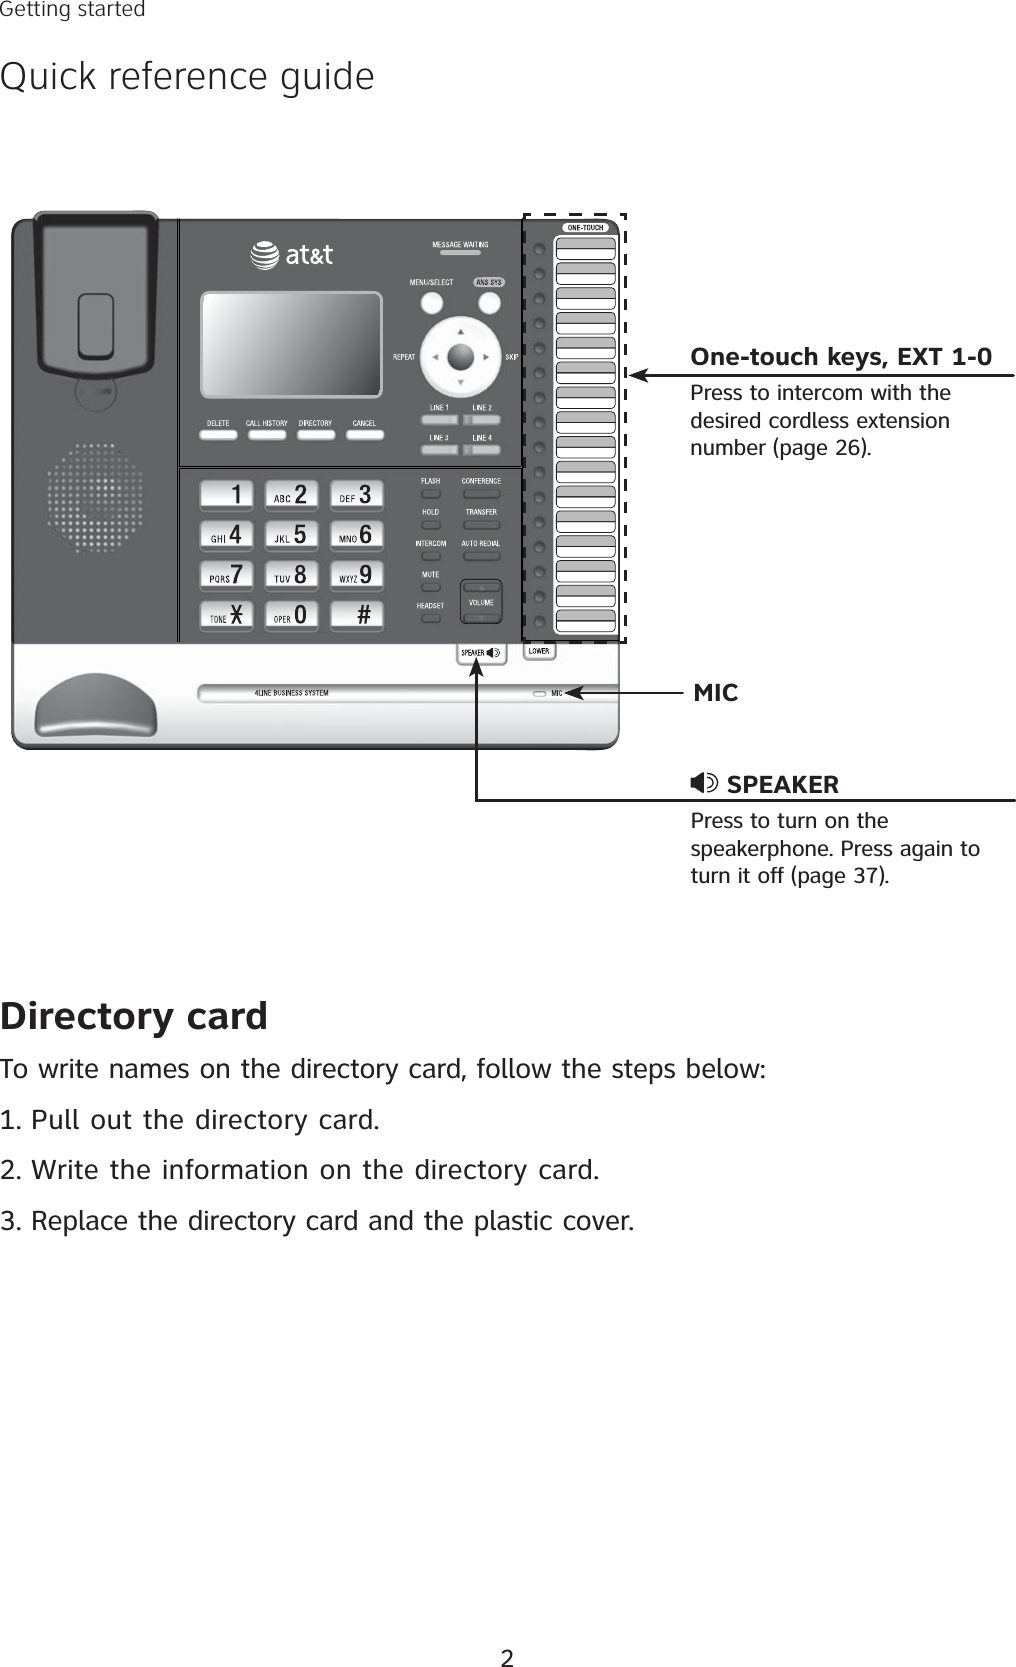 One-touch keys, EXT 1-0Press to intercom with the desired cordless extension number (page 26).Getting startedQuick reference guideDirectory cardTo write names on the directory card, follow the steps below: Pull out the directory card.Write the information on the directory card.Replace the directory card and the plastic cover. 1.2.3. SPEAKERPress to turn on the speakerphone. Press again to turn it off (page 37).2MIC